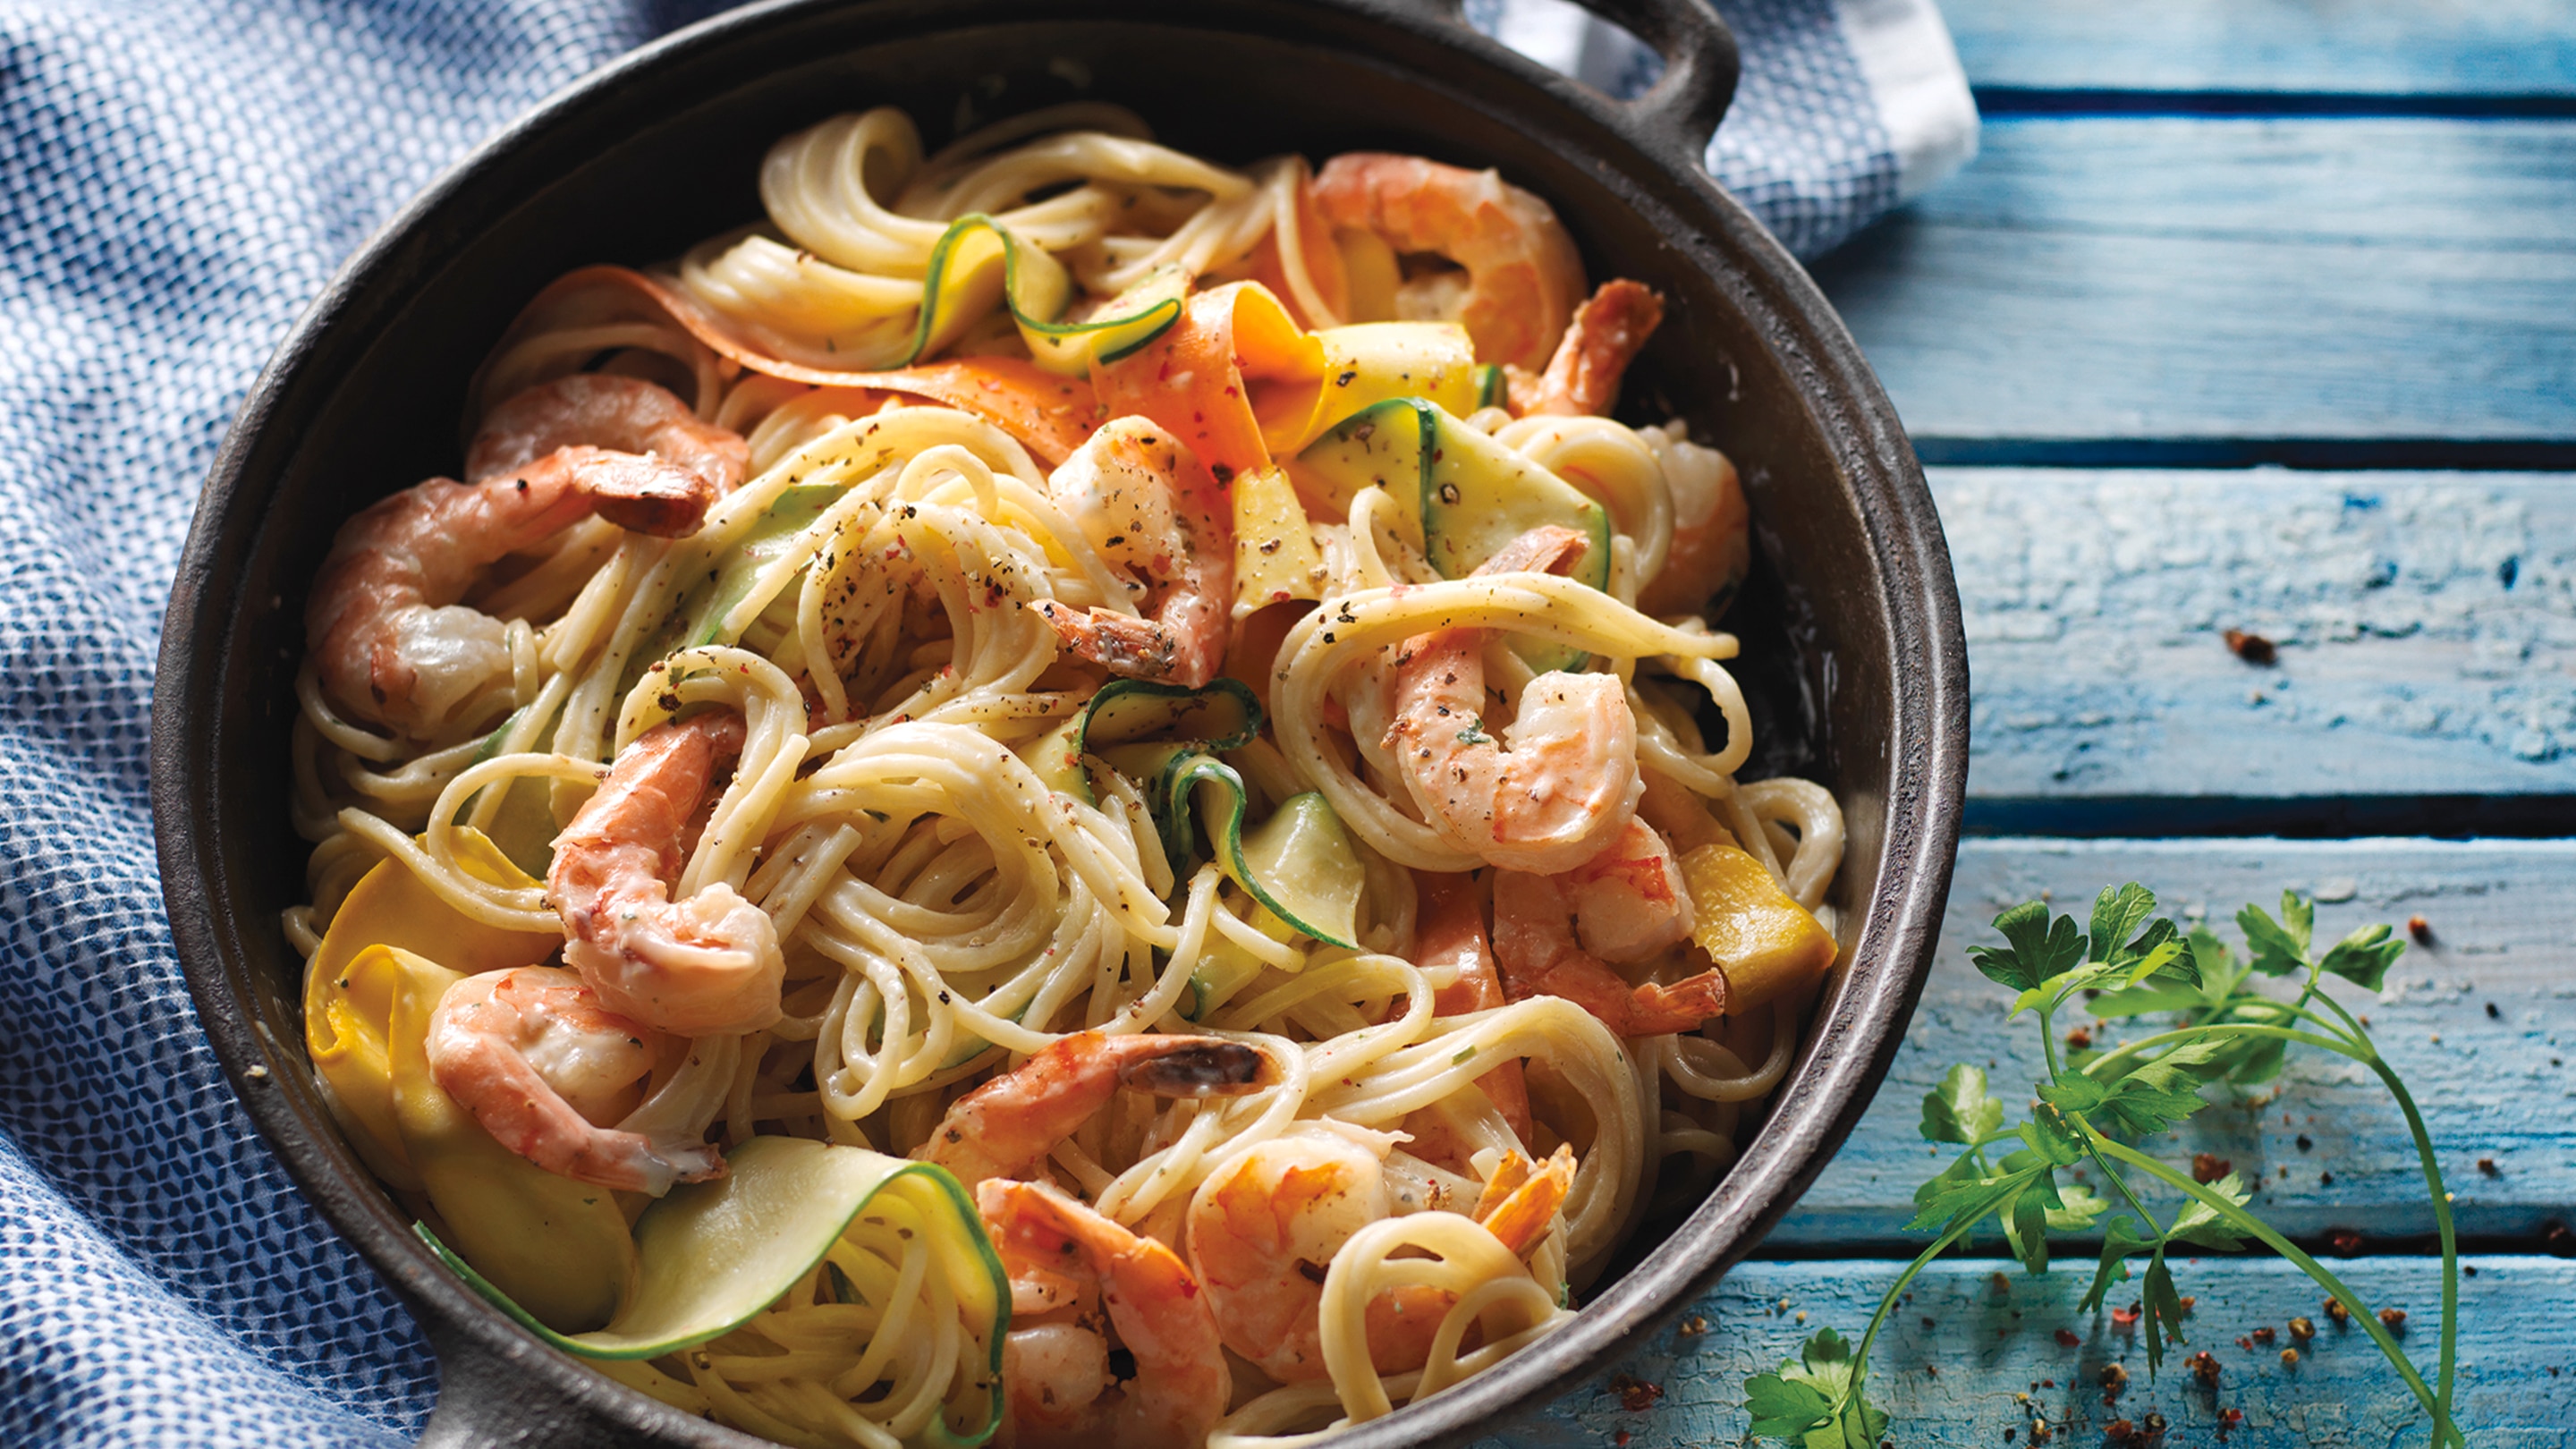 Spaghetti with shrimp and vegetable noodles in cast iron pan